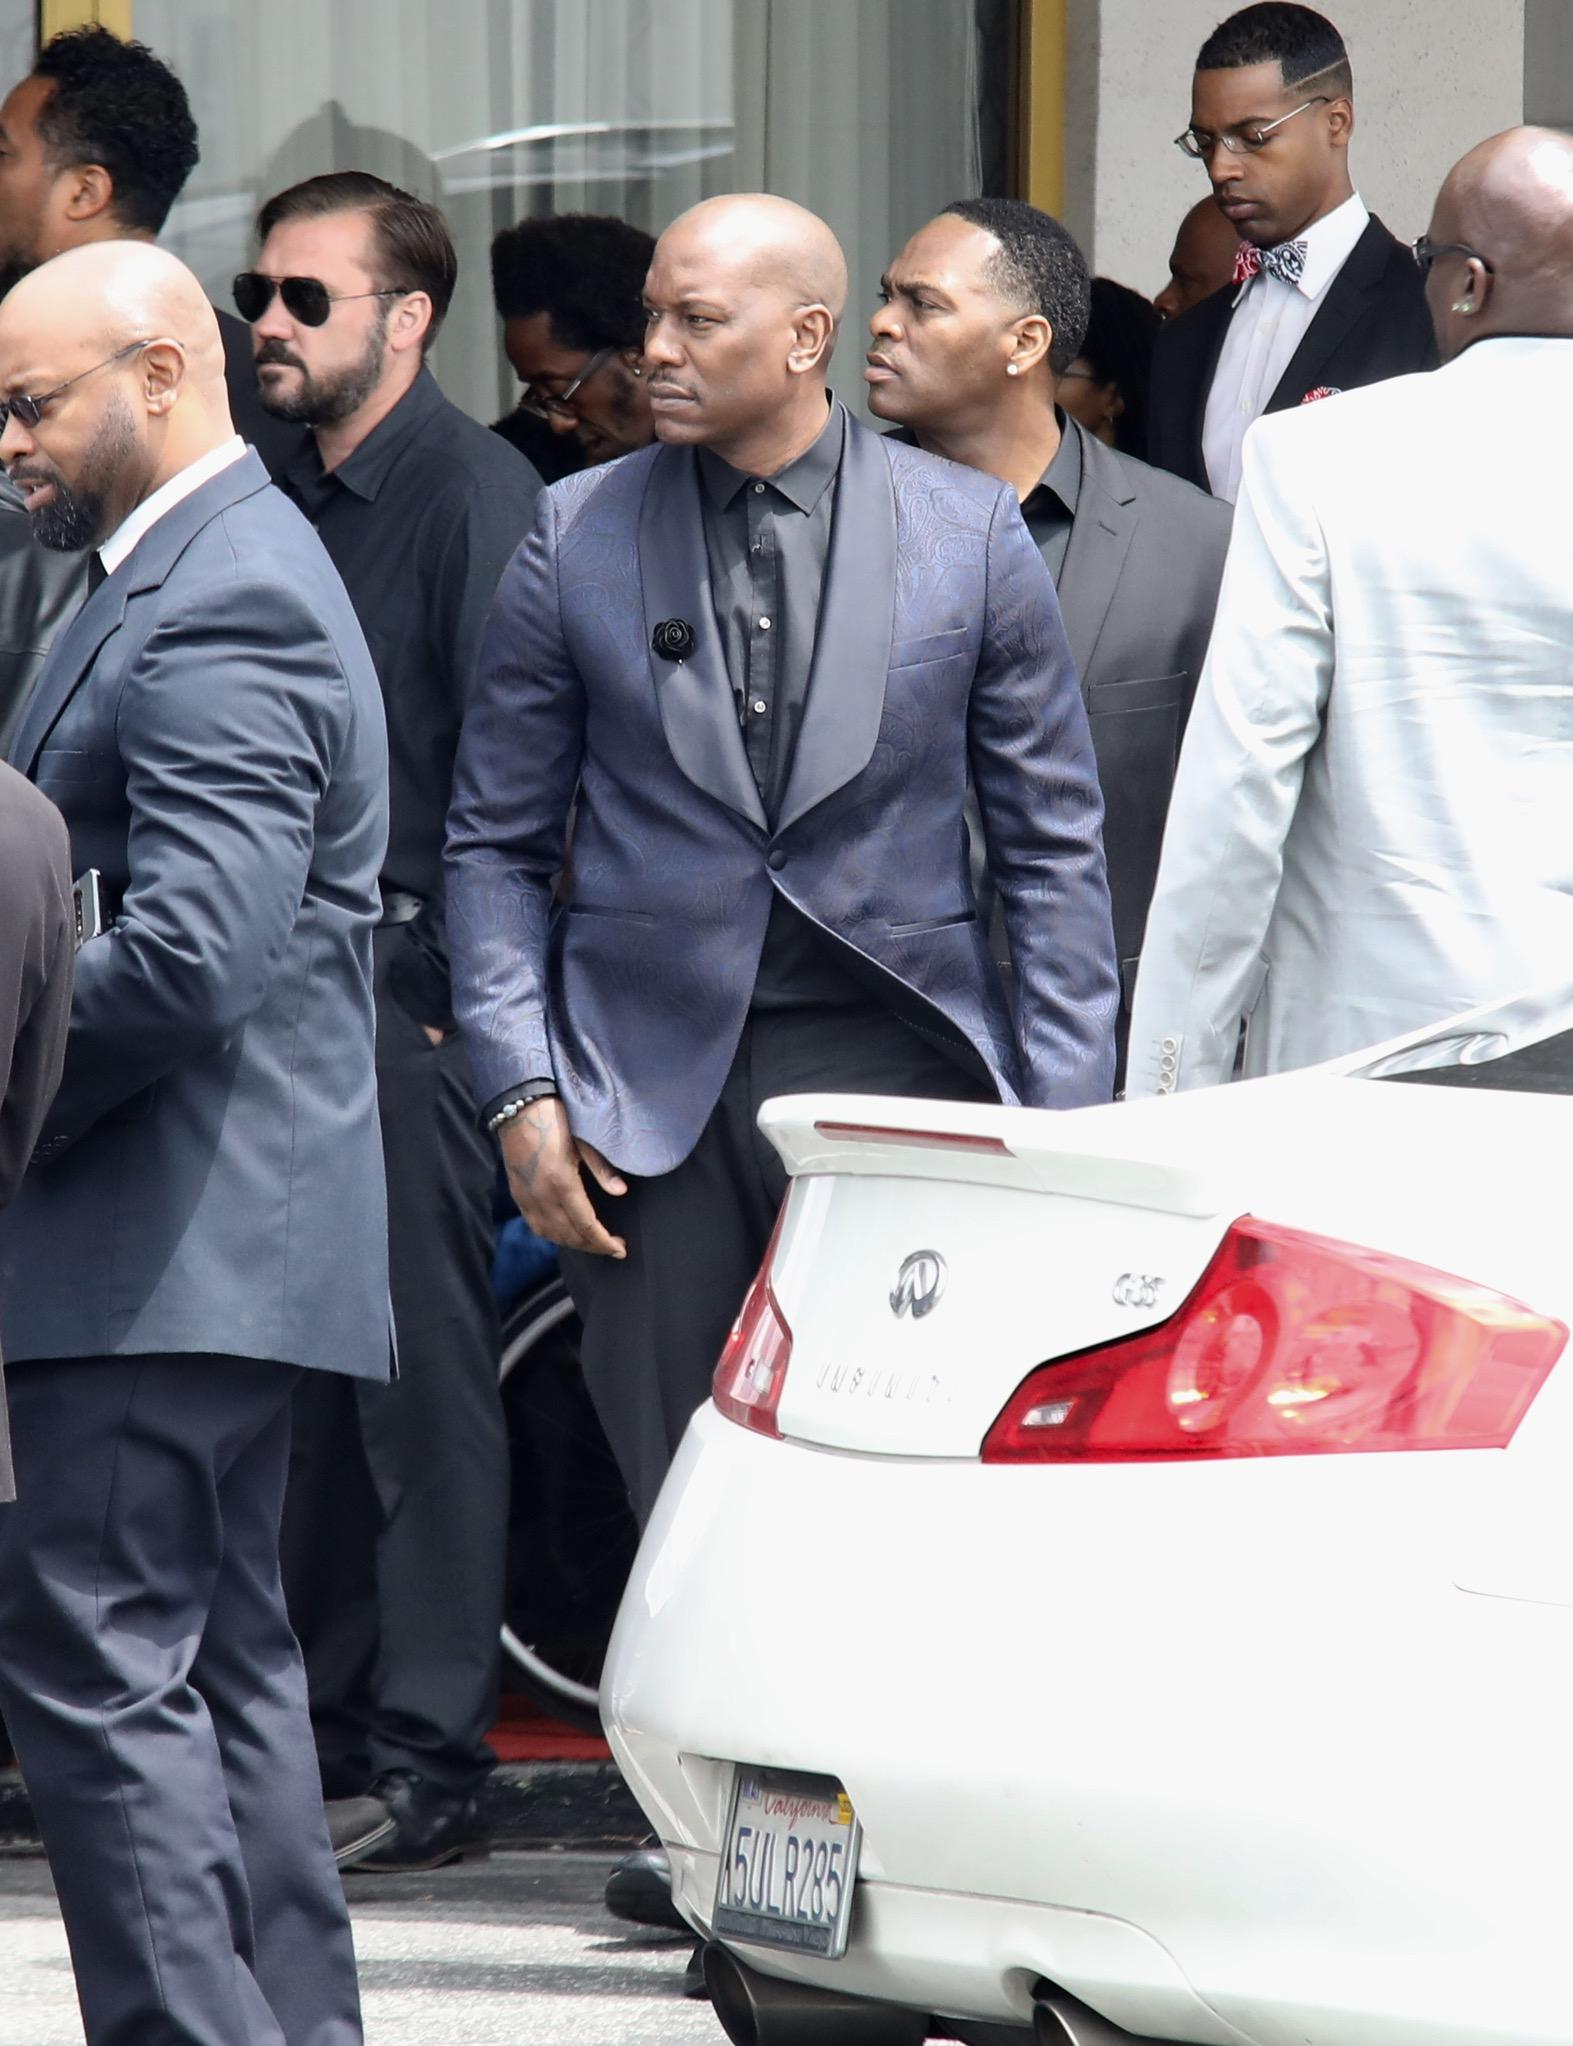 John Singleton family and friends pay tribute at private memorial